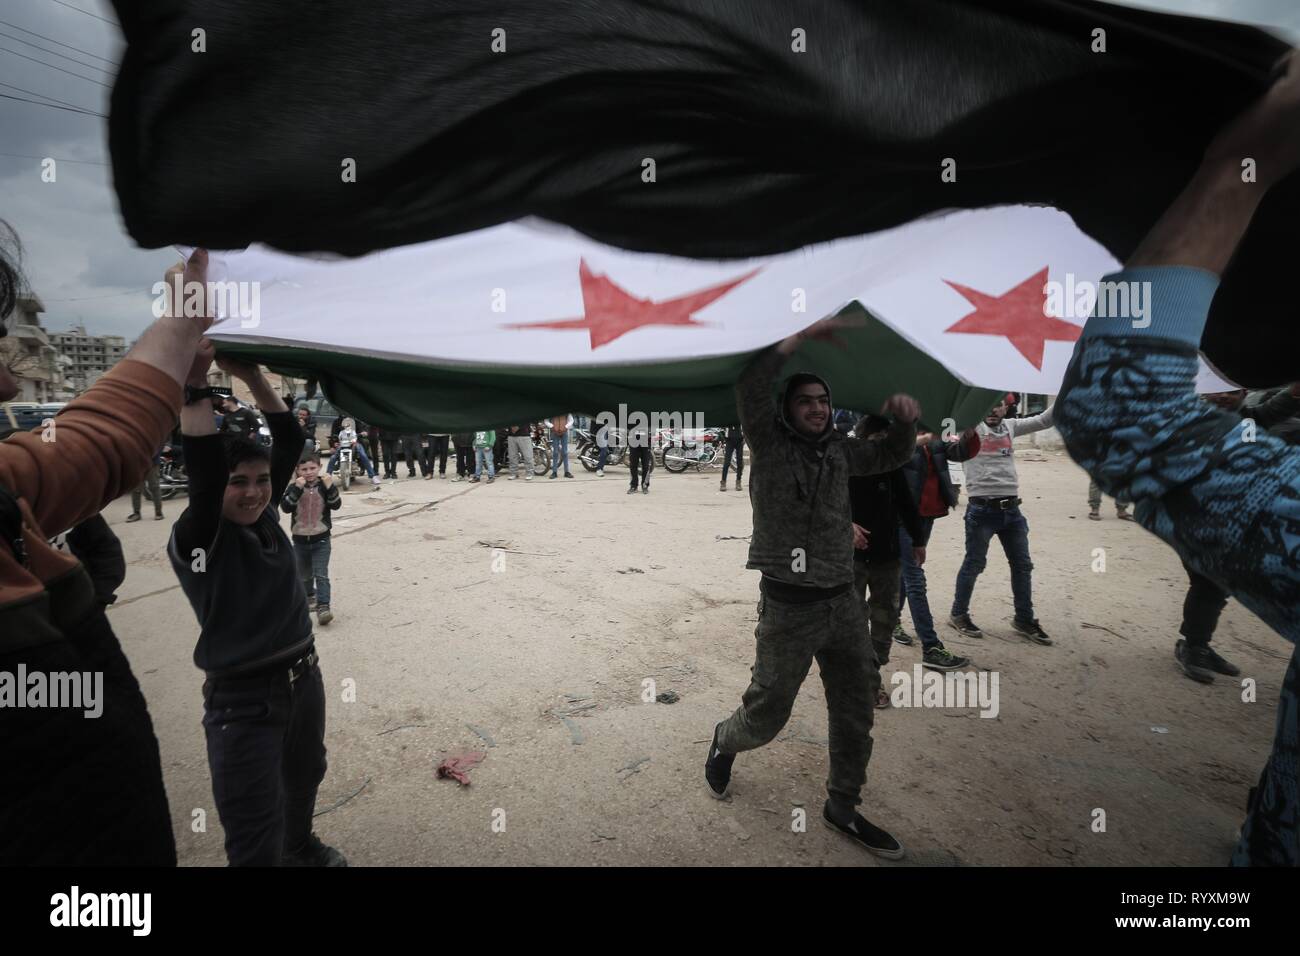 Benesh, Idleb, Syria. 15th Mar, 2019. Syrians are seen holding an opposition flag during the celebration.Syrians in the town of Bensh, which lies east of Idlib and controlled by the opposition, celebrated the eighth anniversary of the uprising against the rule of President Bashar al-Assad. Credit: Mohamad Saeed/SOPA Images/ZUMA Wire/Alamy Live News Stock Photo